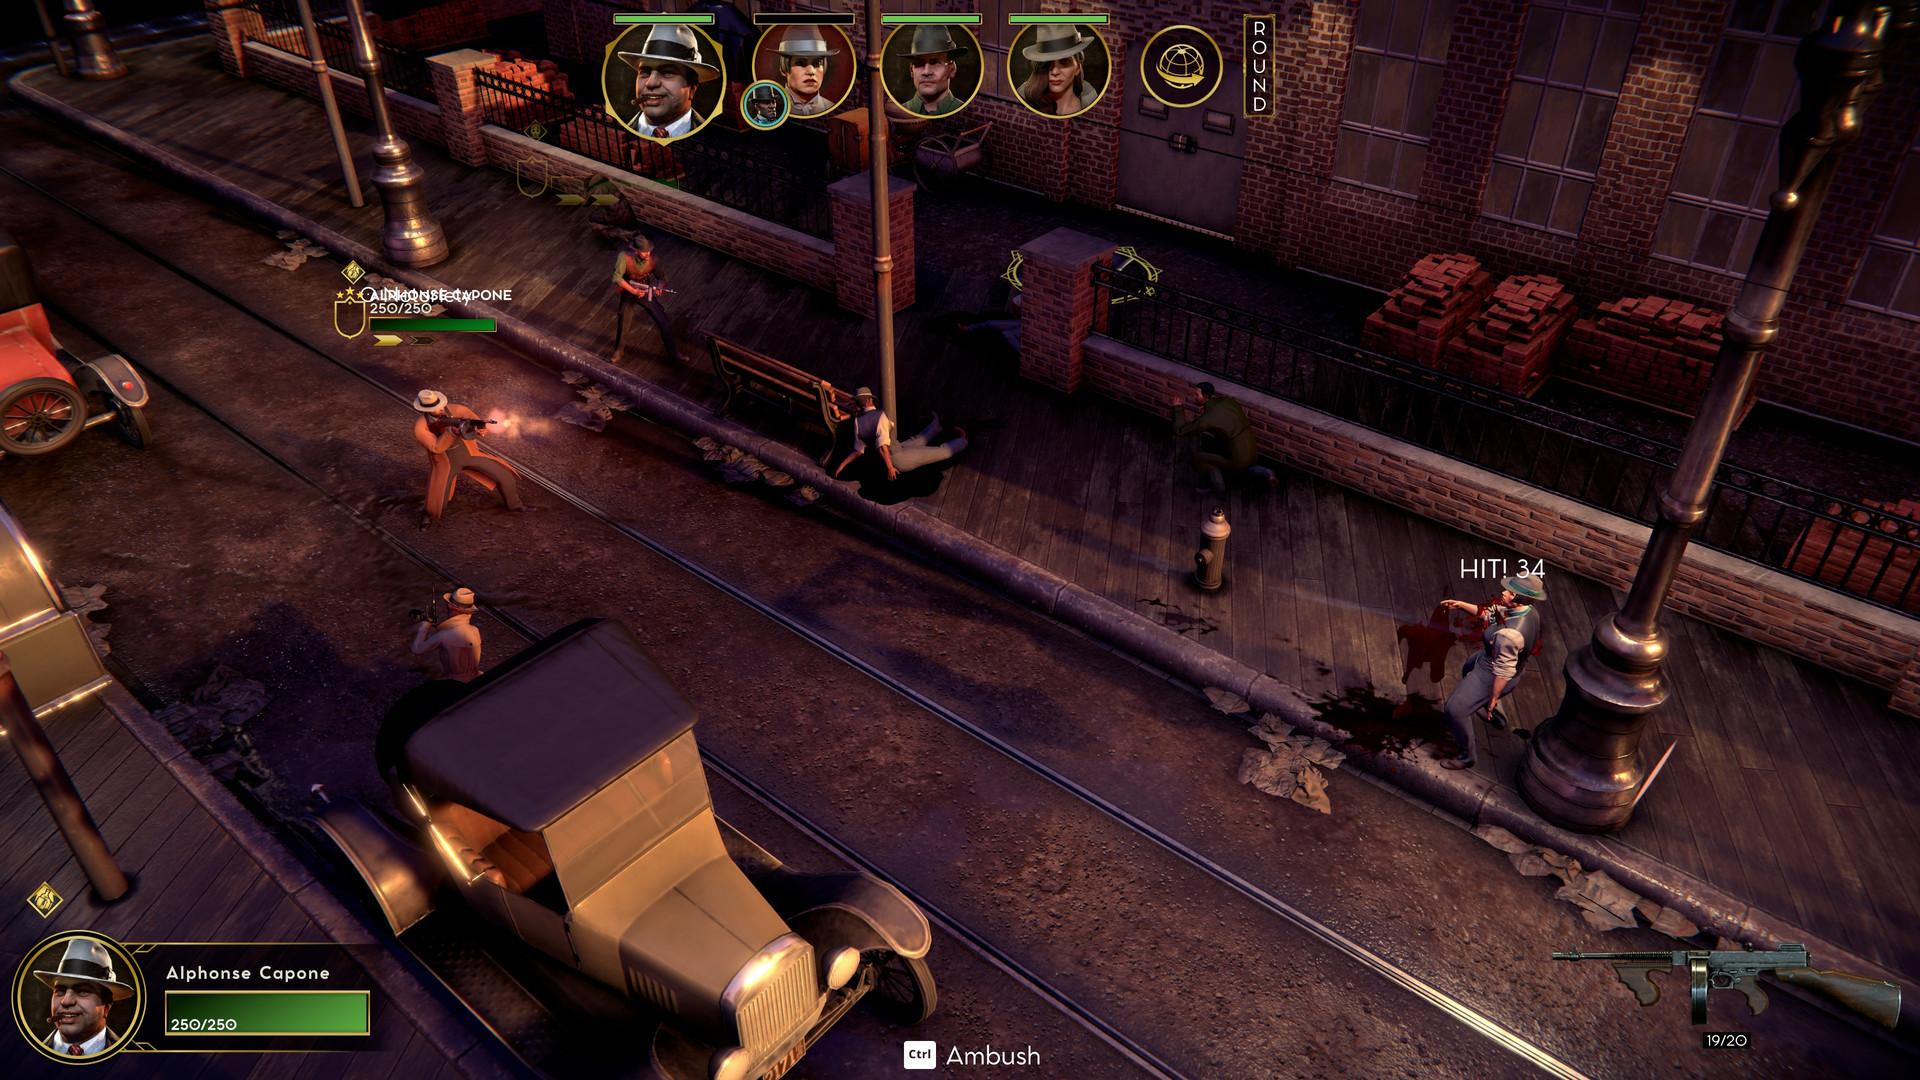 Screenshot №6 from game Empire of Sin